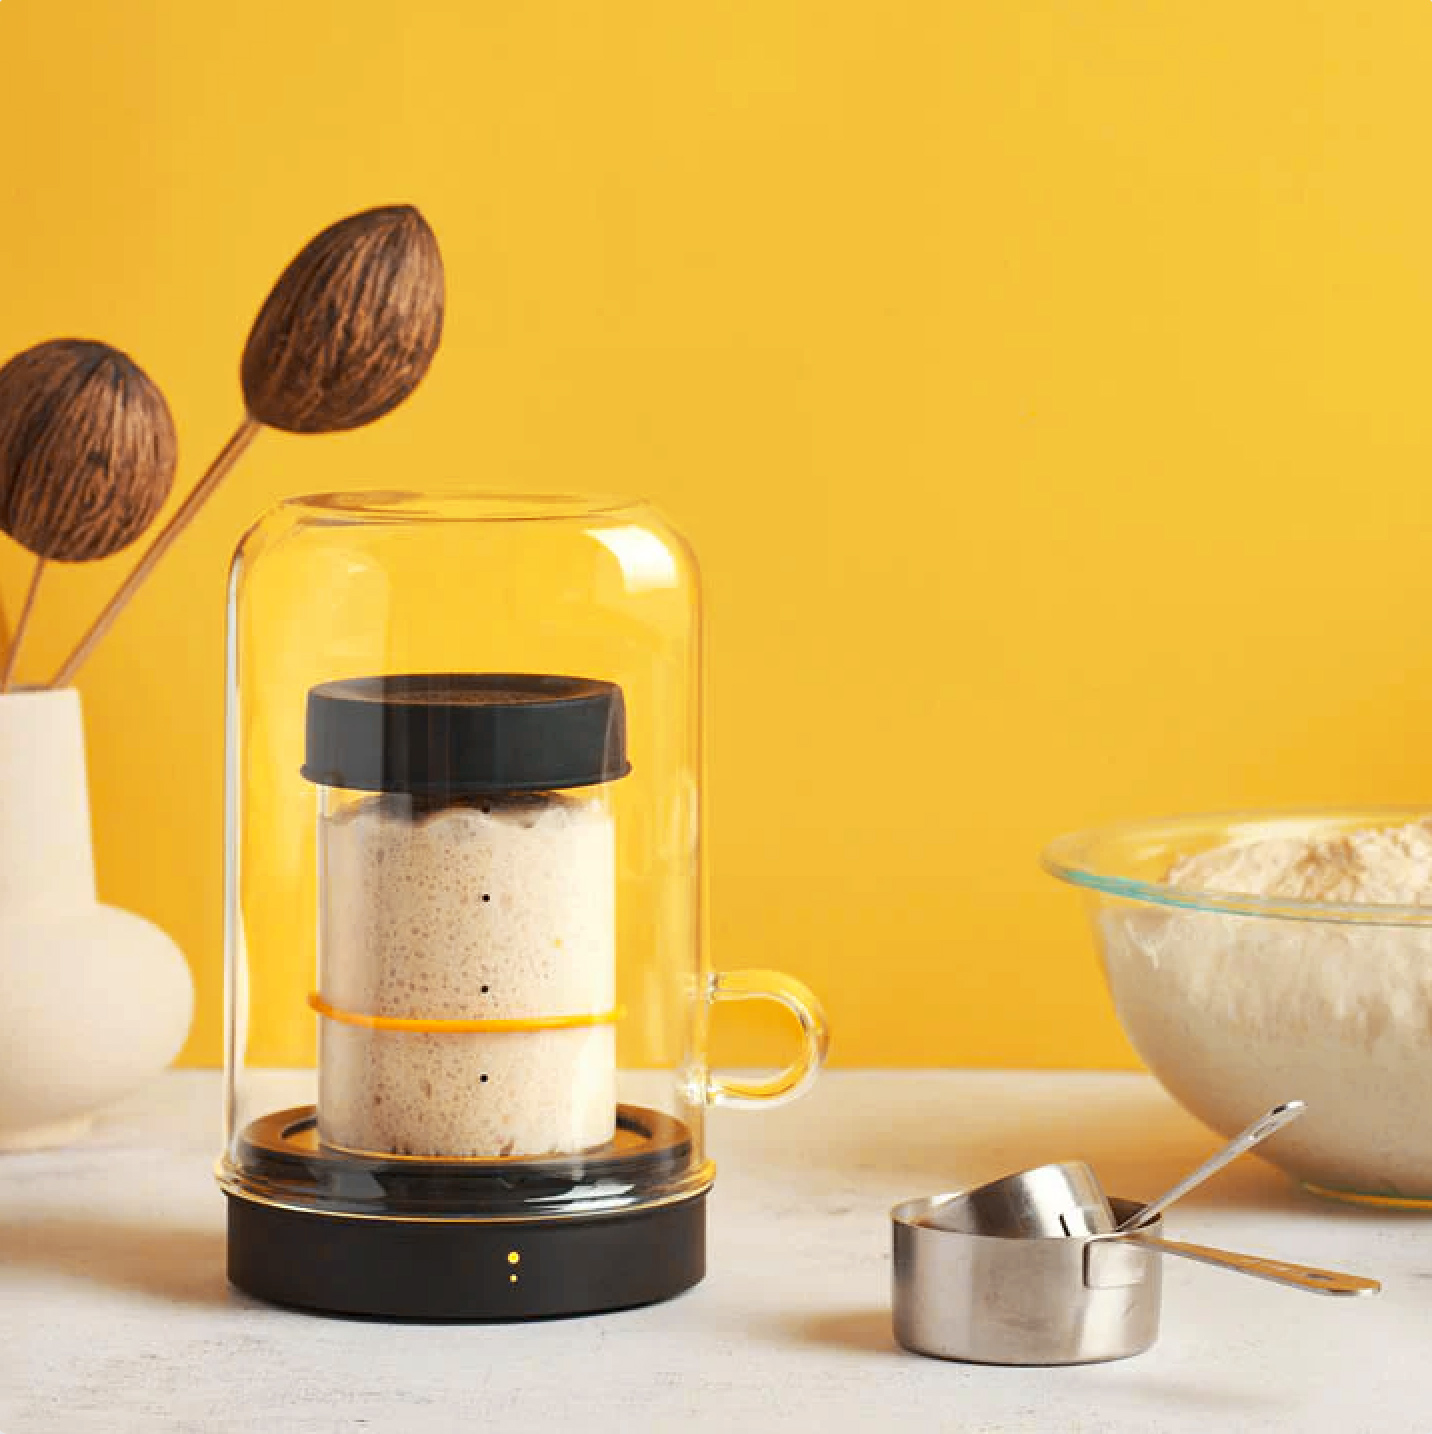 The Goldie Sourdough Warmer in a lifestyle setting with a yellow background